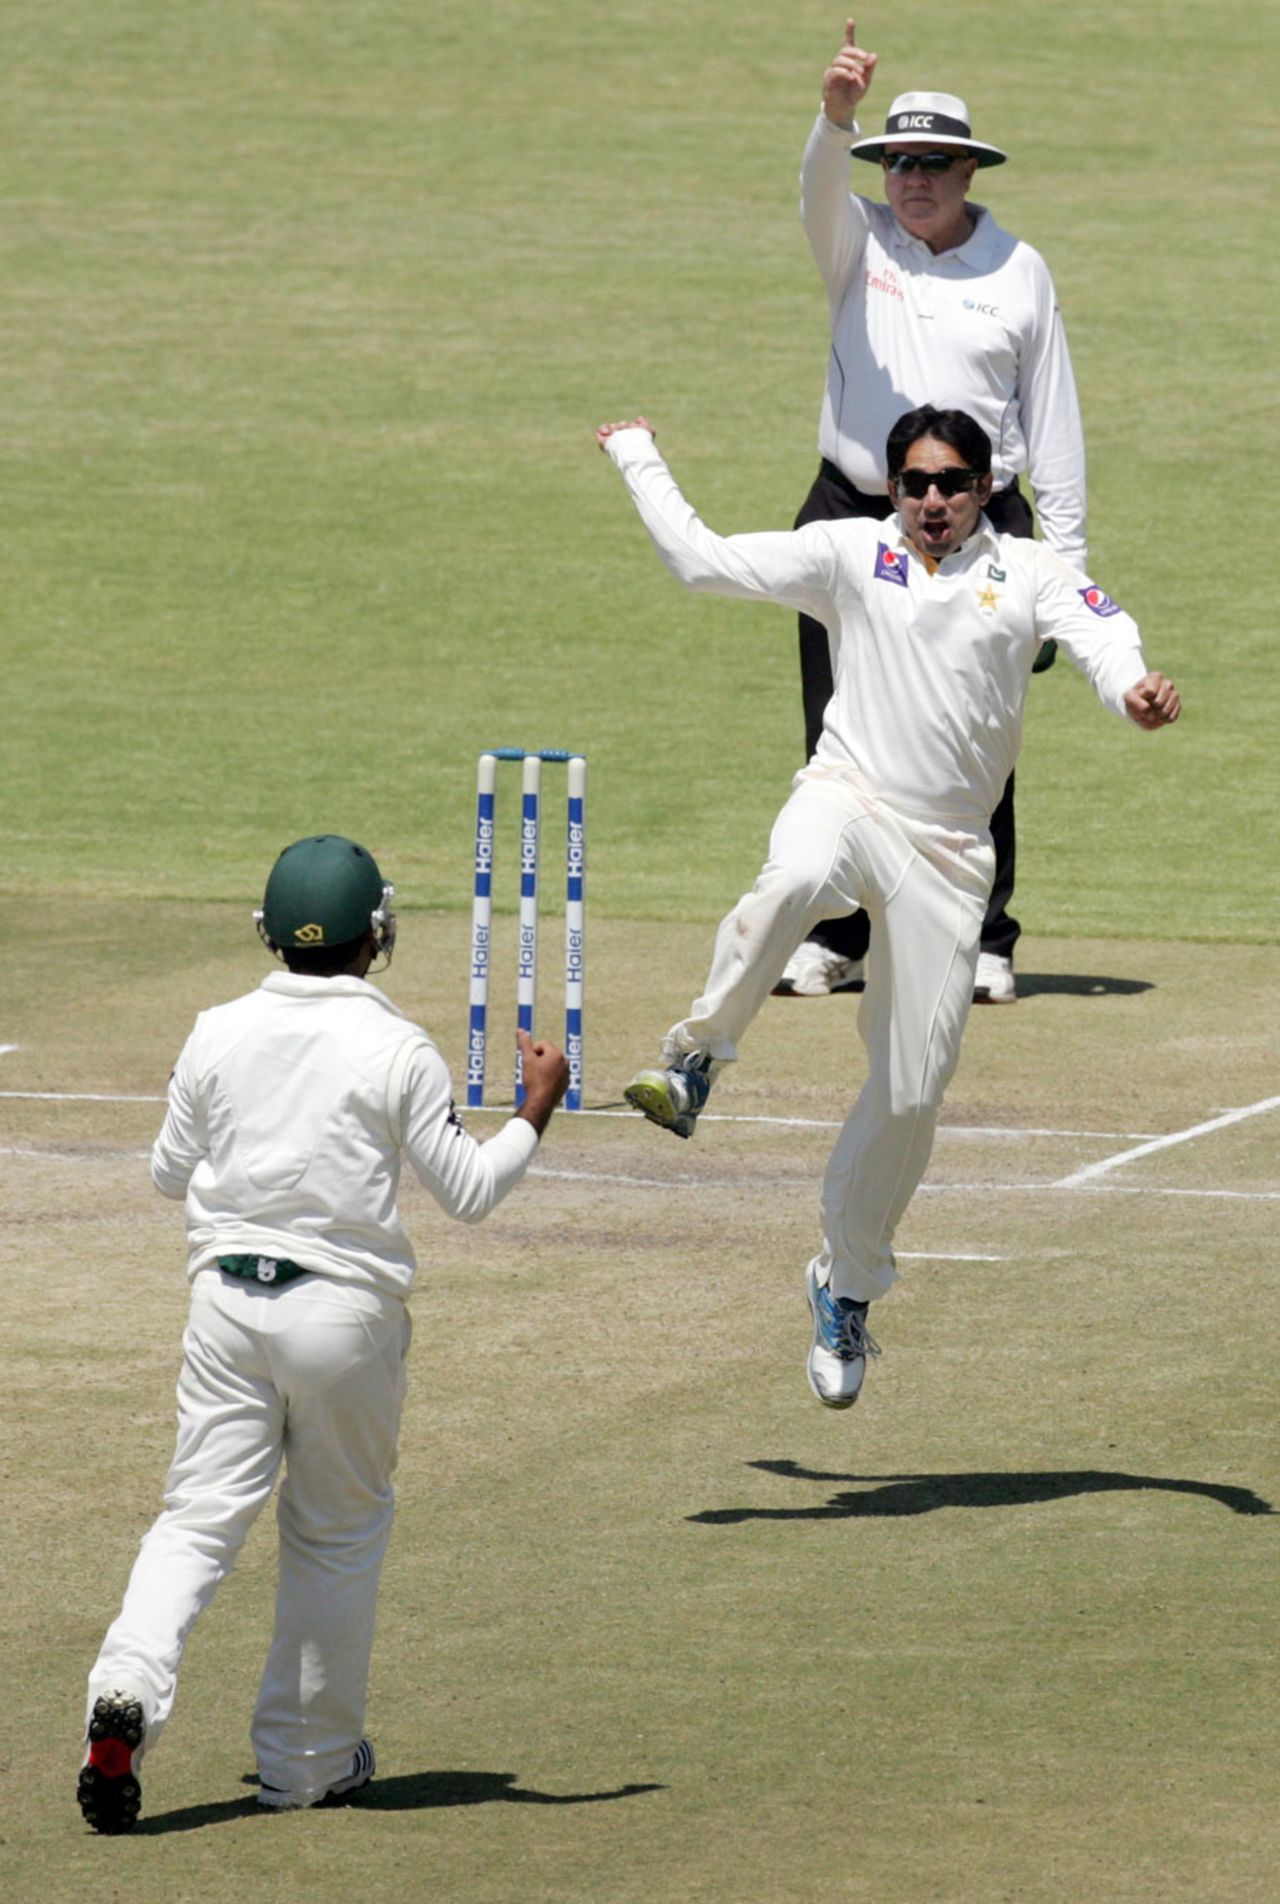 Saeed Ajmal exults after taking a wicket, Zimbabwe v Pakistan, 1st Test, 5th day, Harare, September 7, 2013